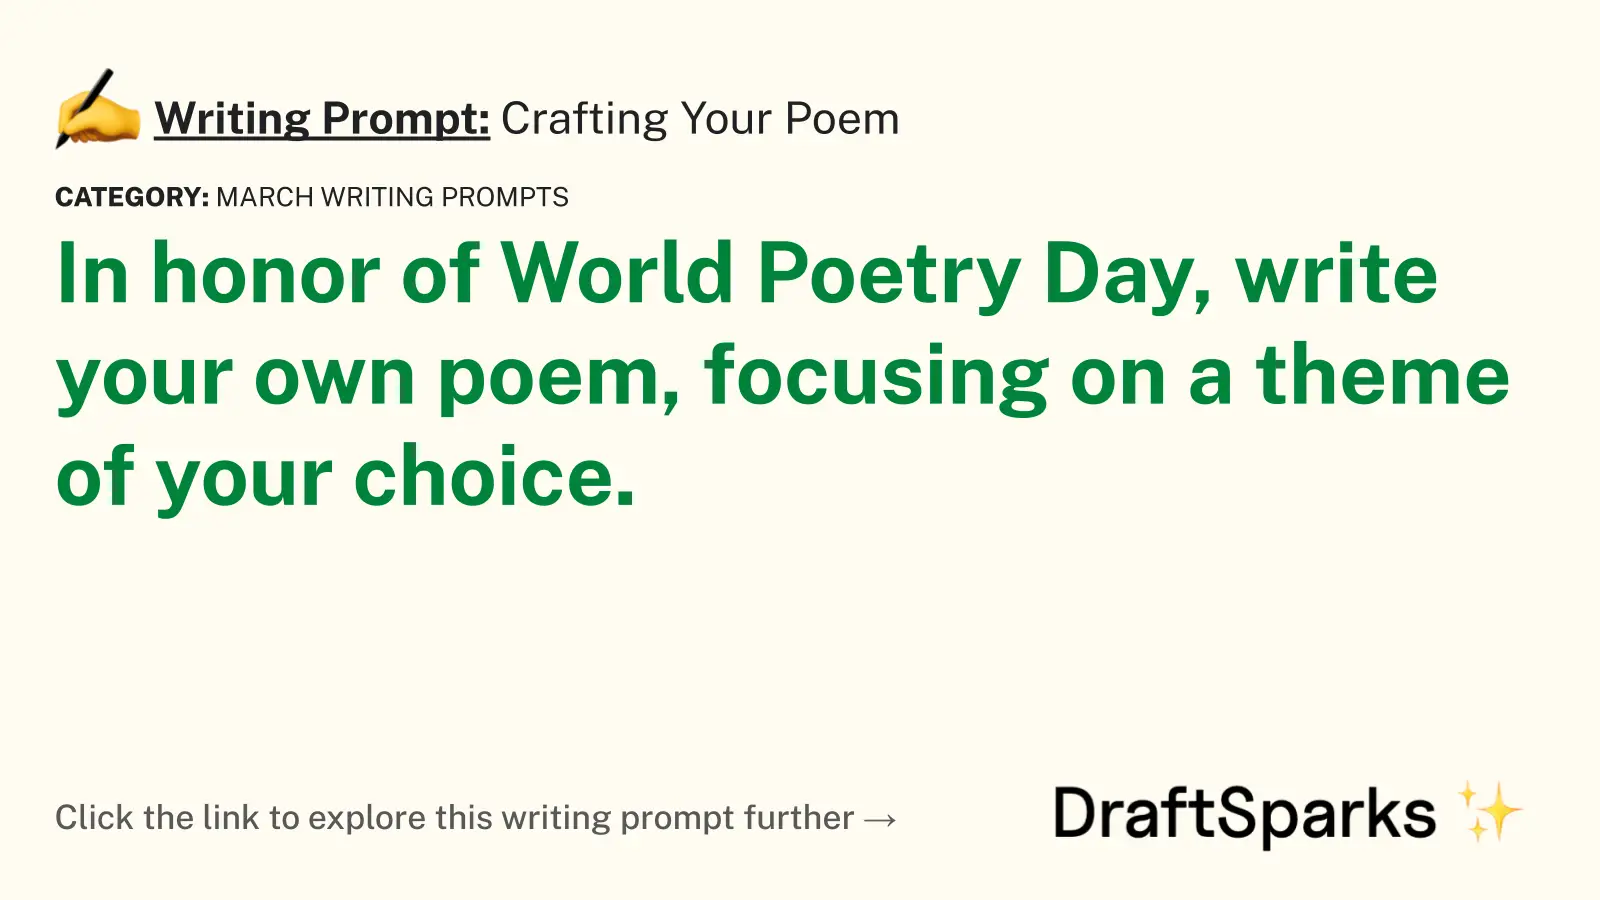 Crafting Your Poem